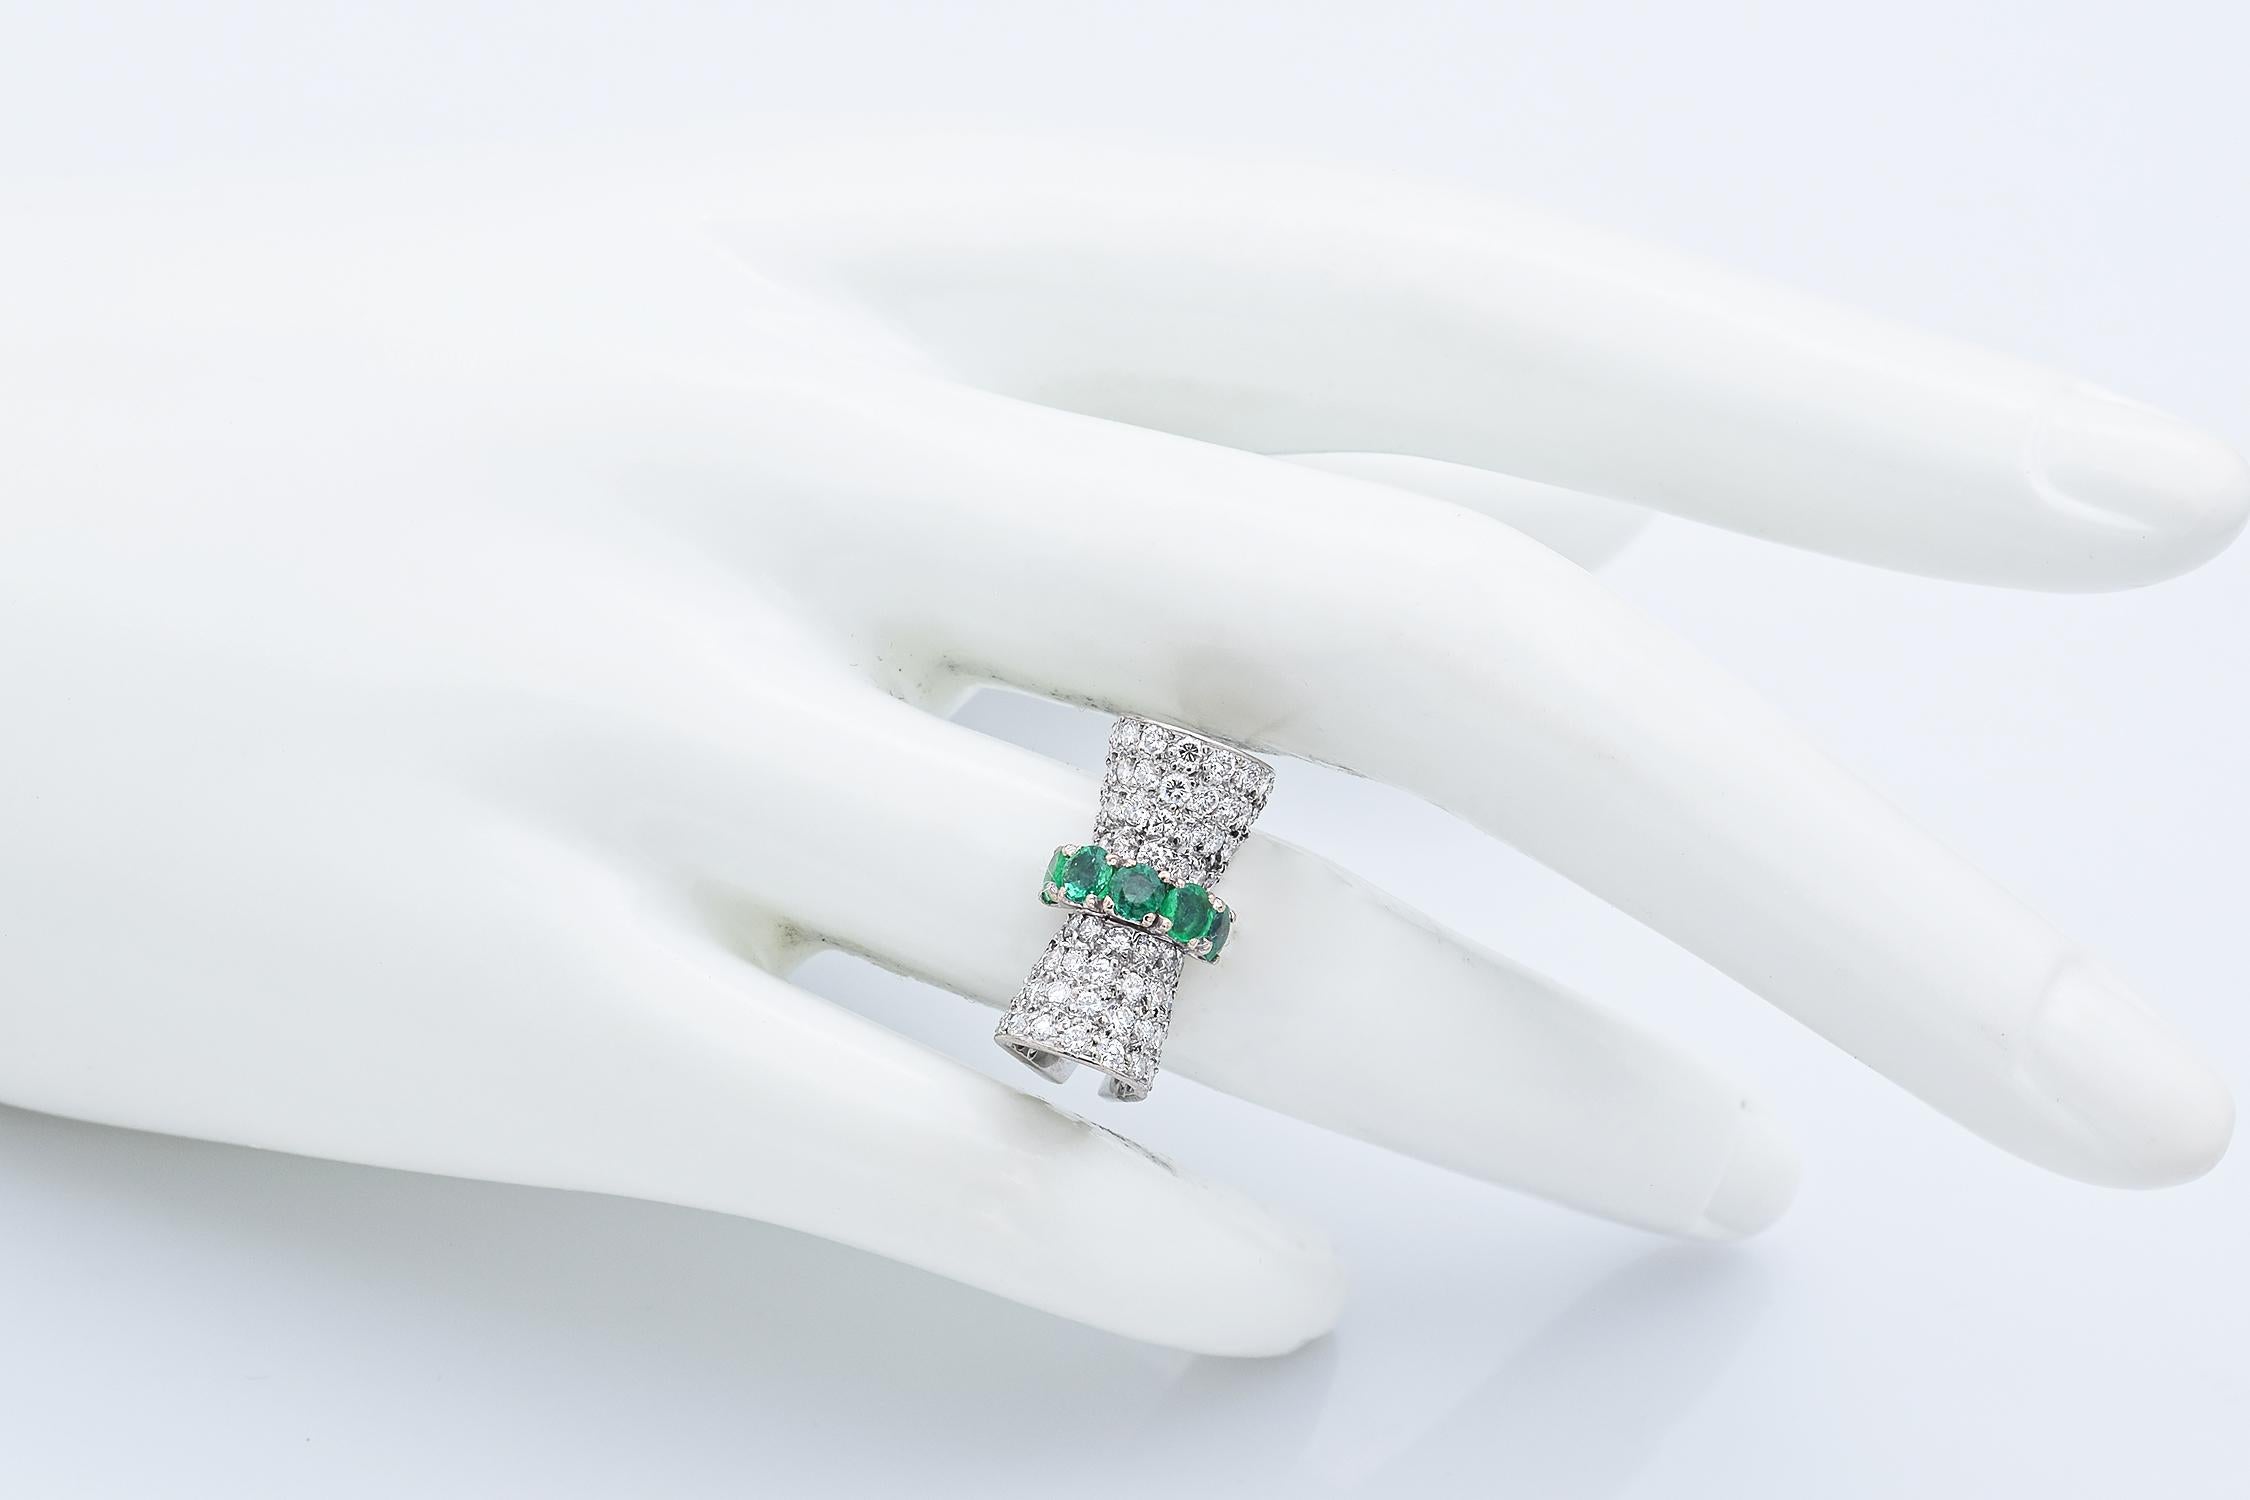 H. Stern 18K White Gold Emerald & 1.60 TCW Diamond Bow Ring with Box Size 5.5 3